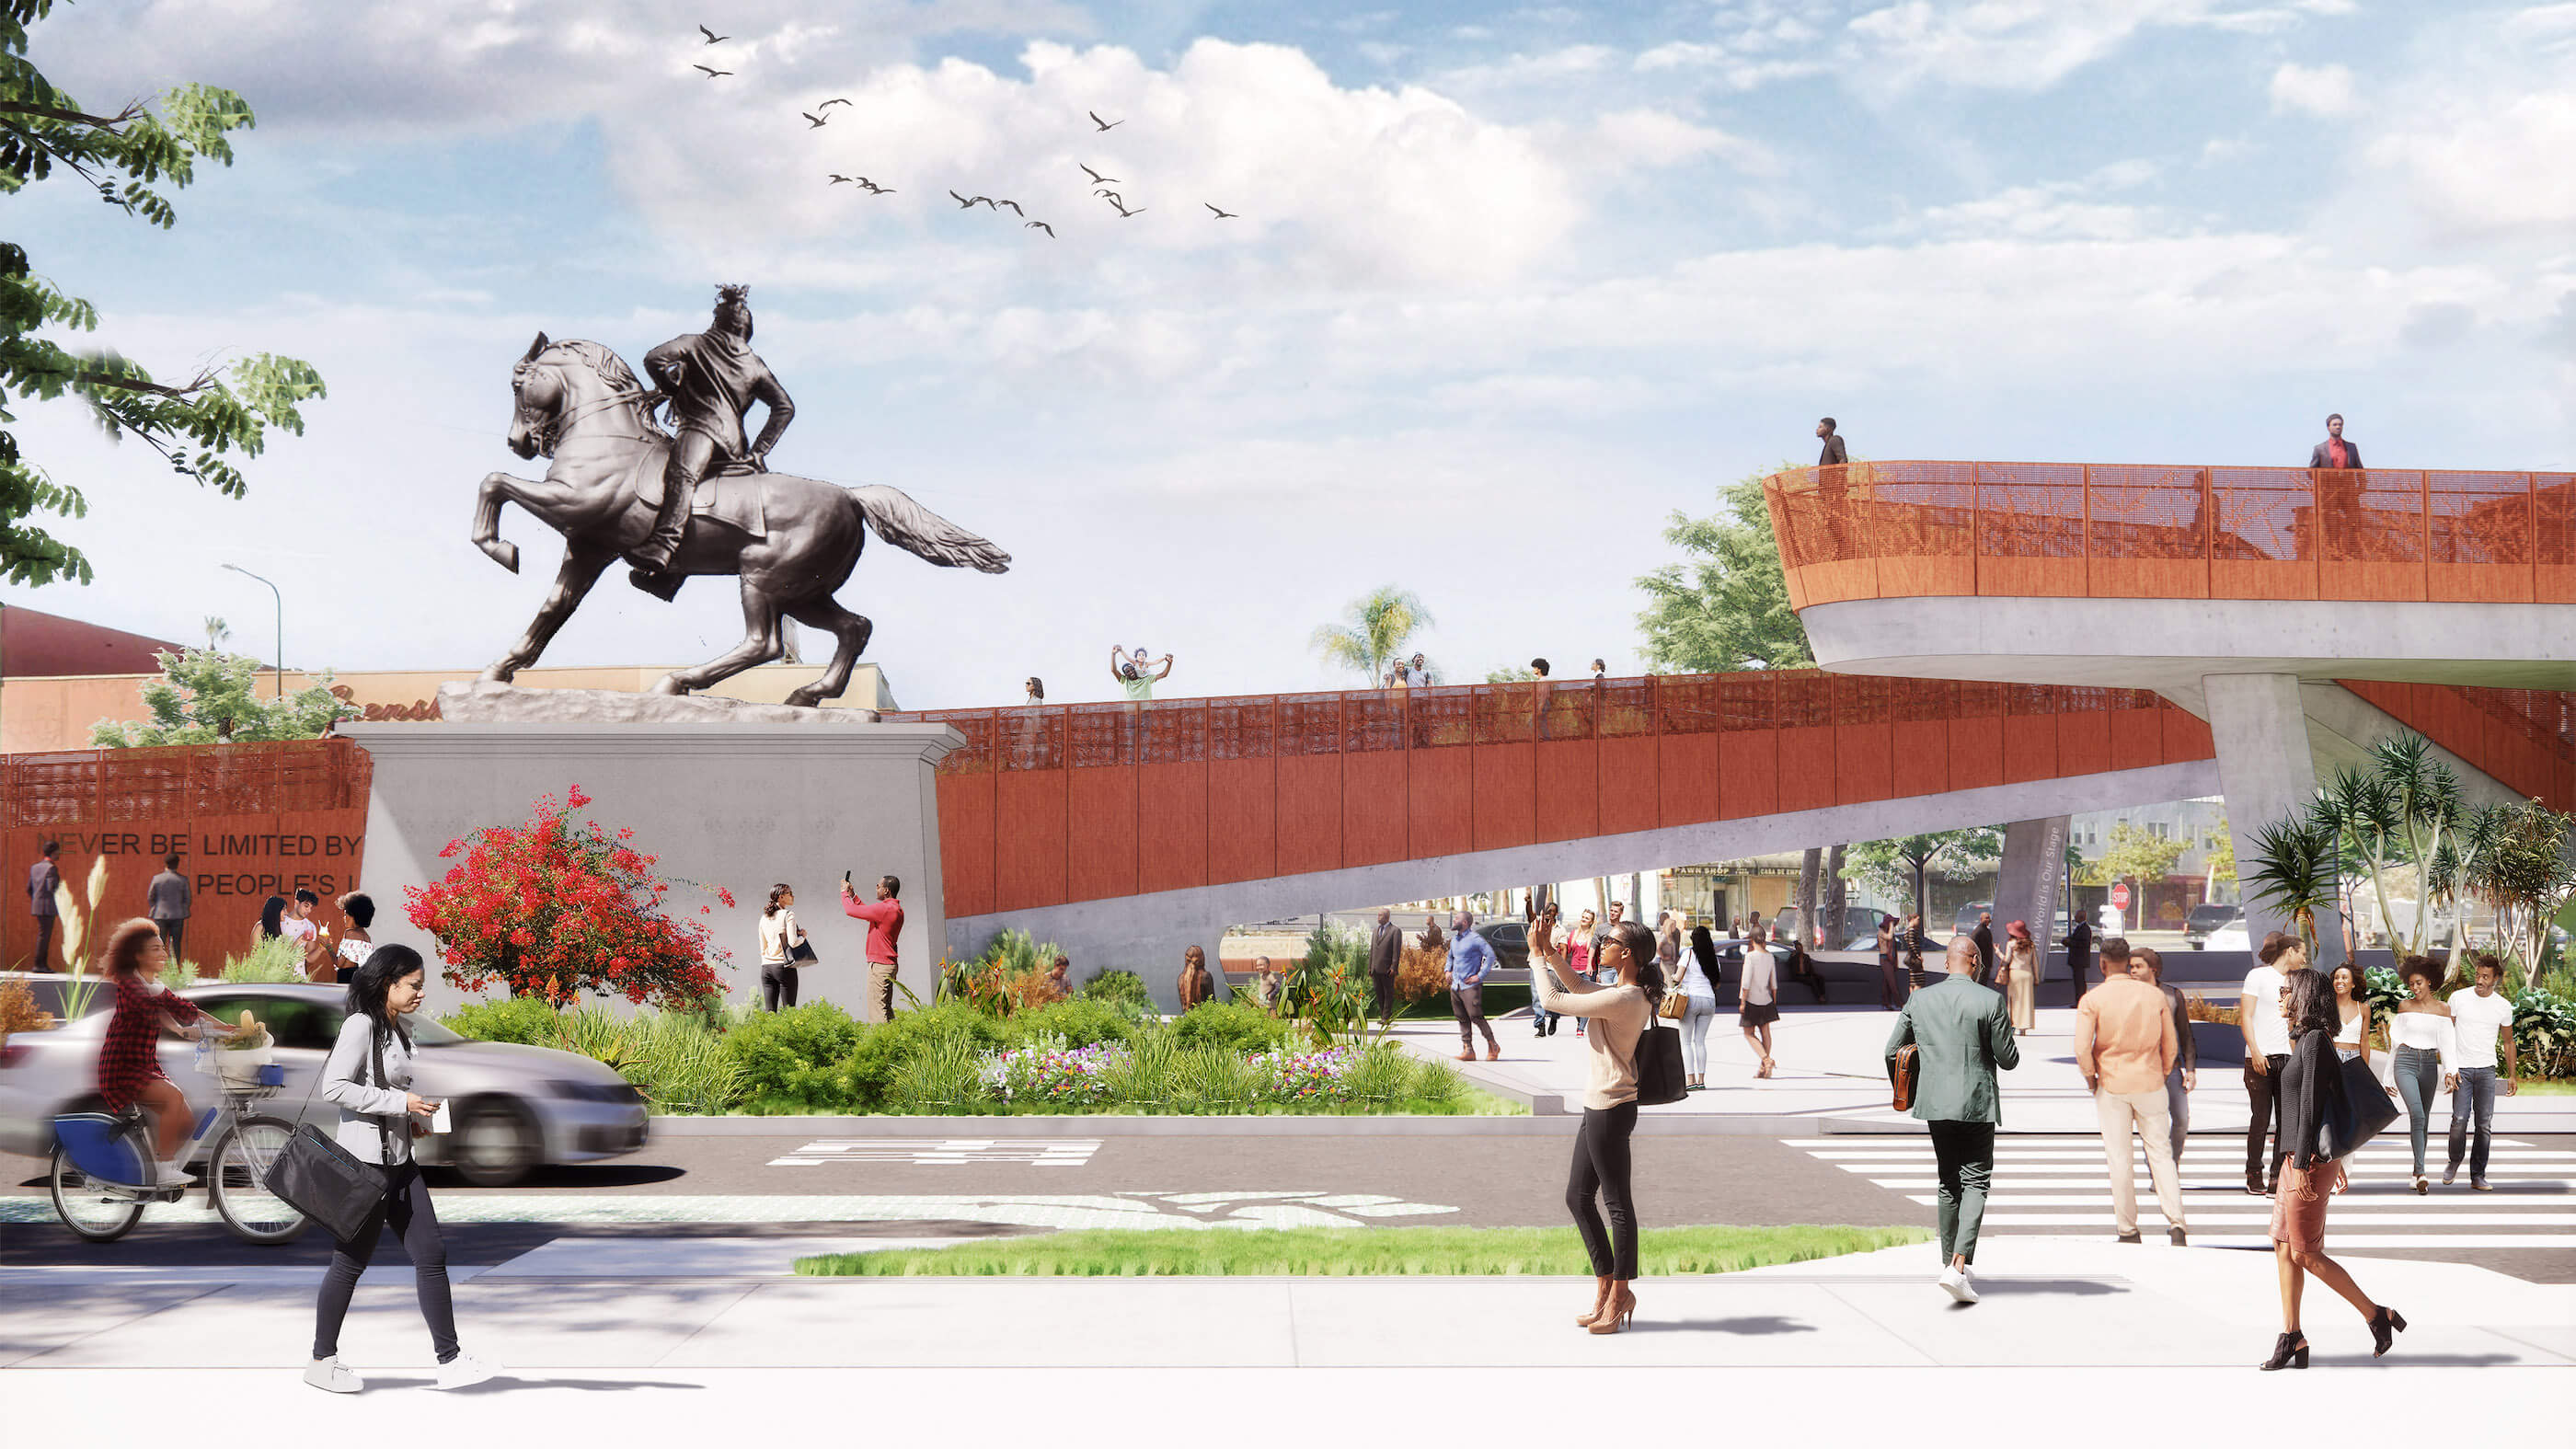 rendering of a large equestrian sculpture in park